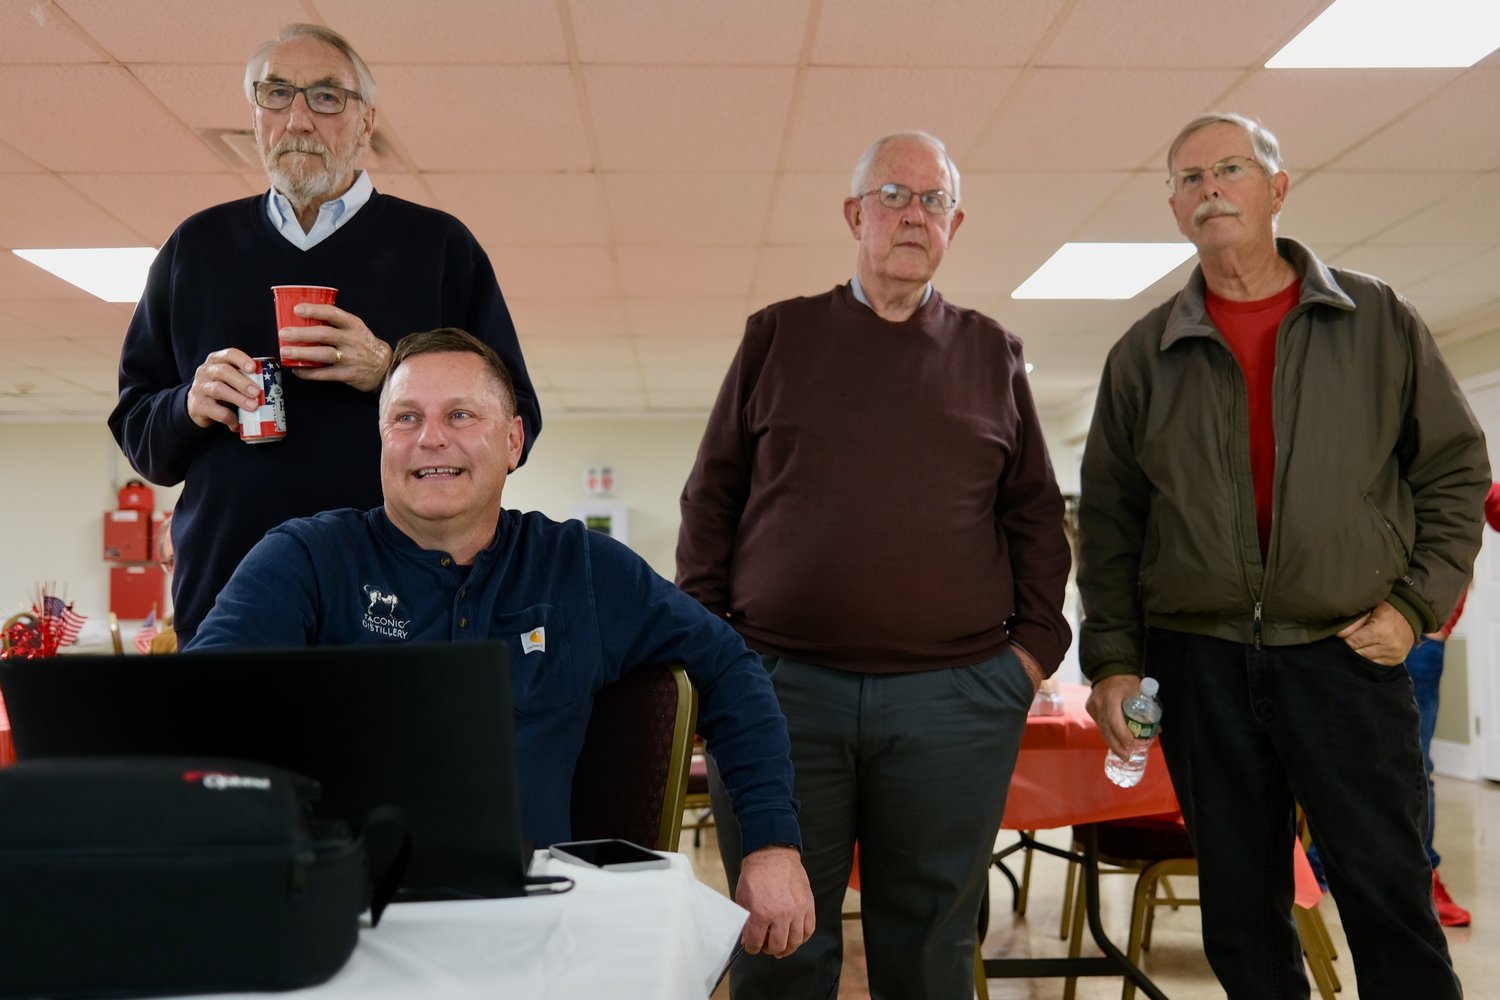 Town Council member Keith Hamilton (sitting), who was re-elected, watches the polling numbers come in Tuesday night at at St. John’s Lodge No. 1, which served as Republican election headquarters. Behind him are (from left) Joe Lorenz, chairman of the Republican Town Committee; Larry Fitzmorris, president of Portsmouth Concerned Citizens; and David Gleason, who was voted back onto the council.